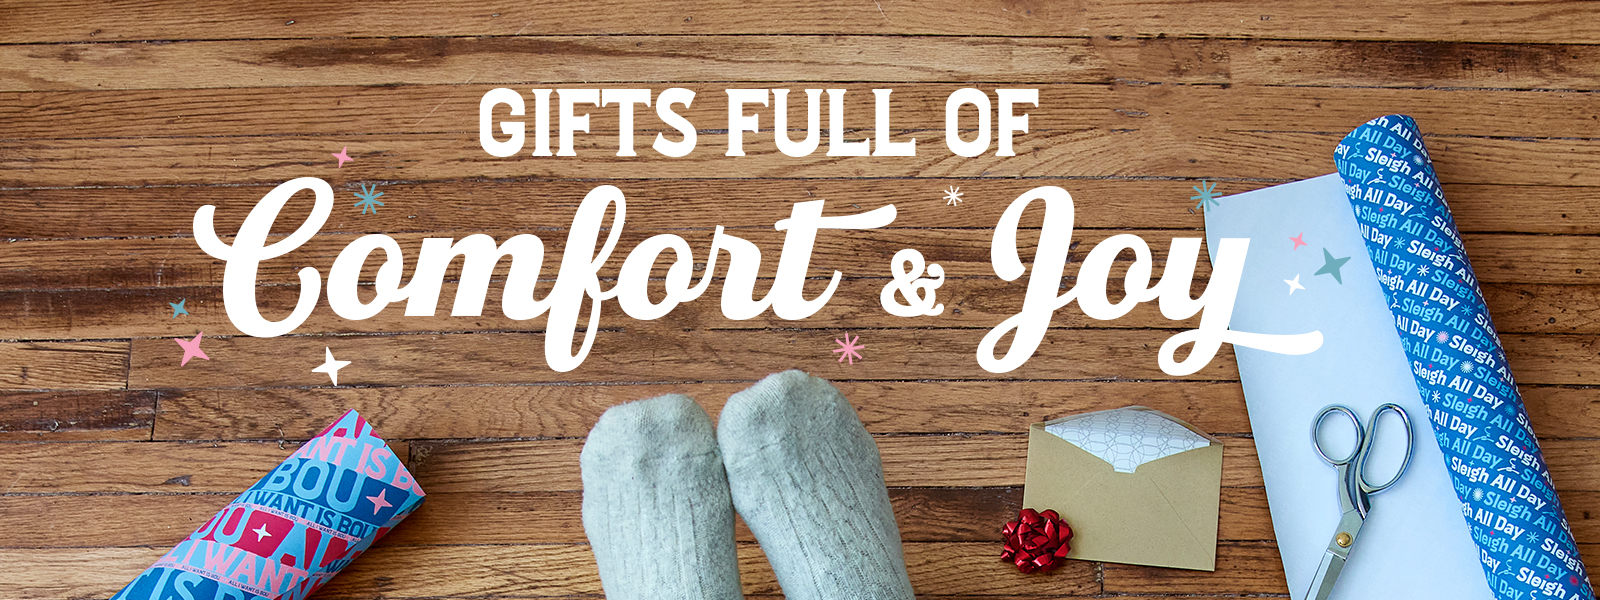 Gifts full of Comfort & Joy. Someone wrapping presents.